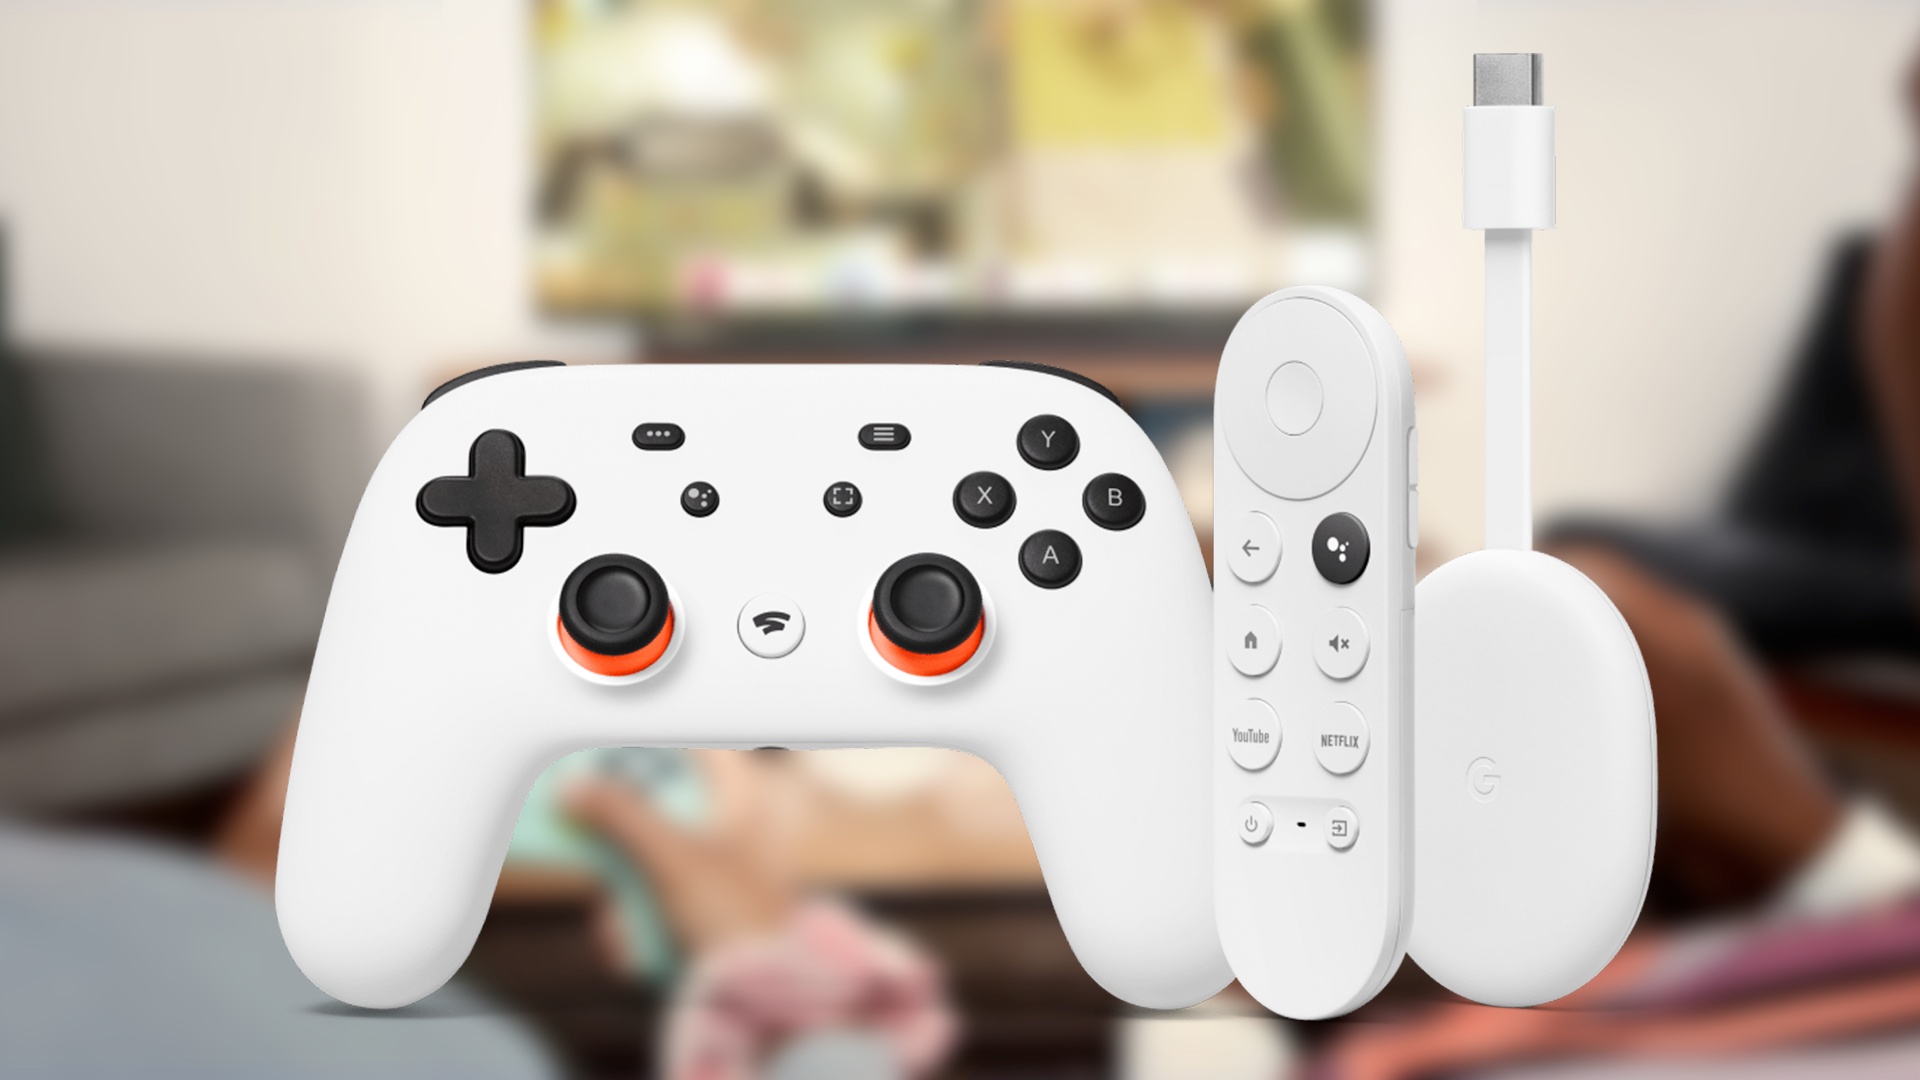 The Stadia controller and Chromecast with Google TV